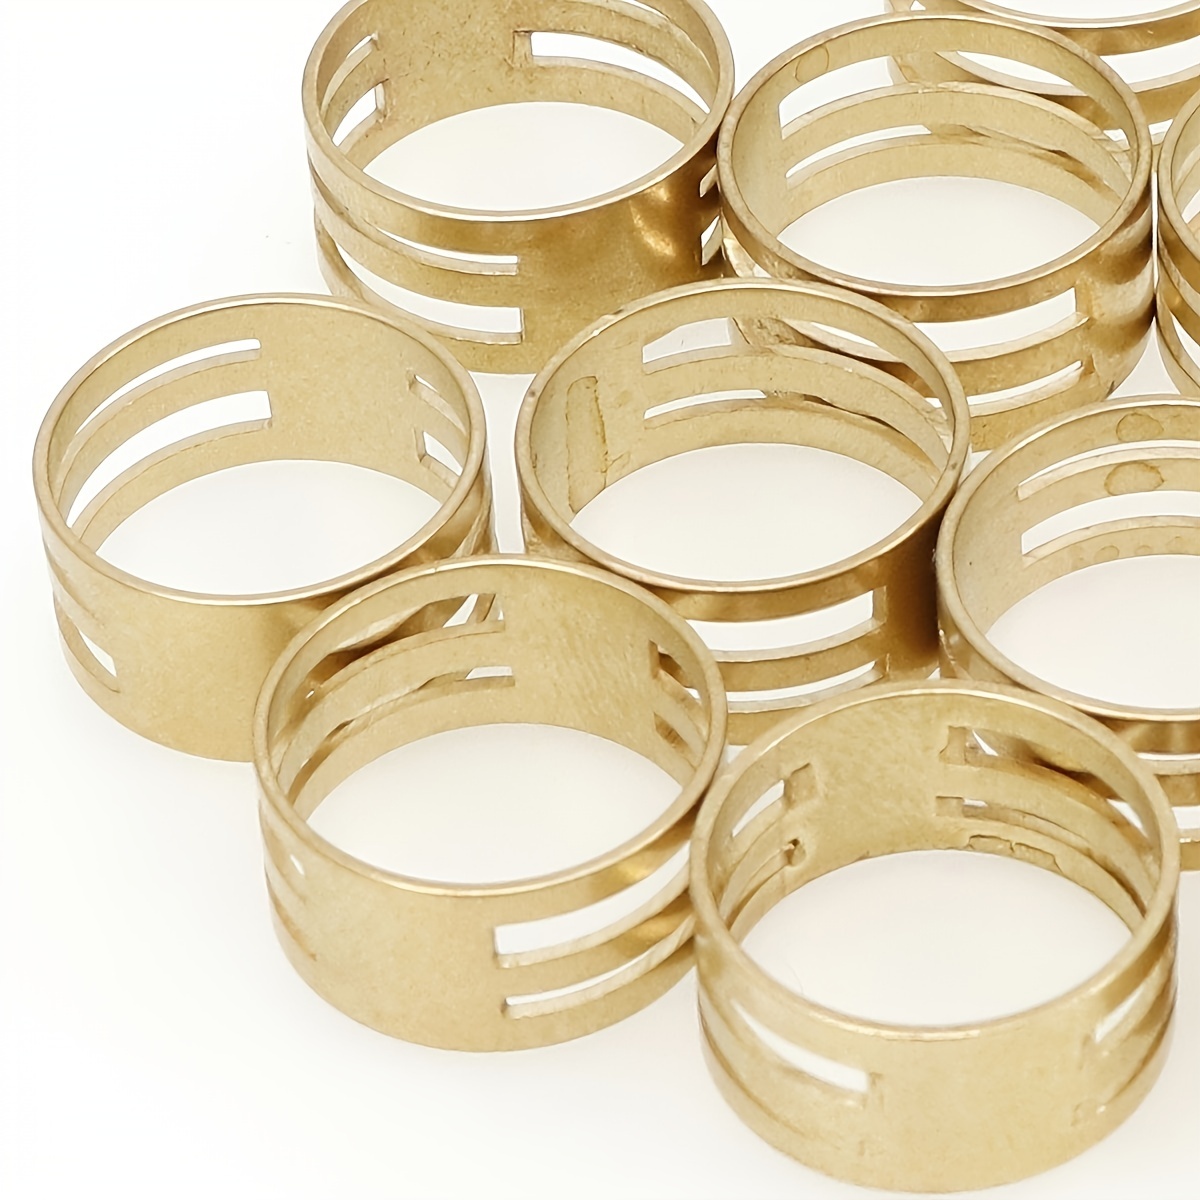 50PCS 14k Gold Filled Twisted Open Jump Rings for Jewelry Making